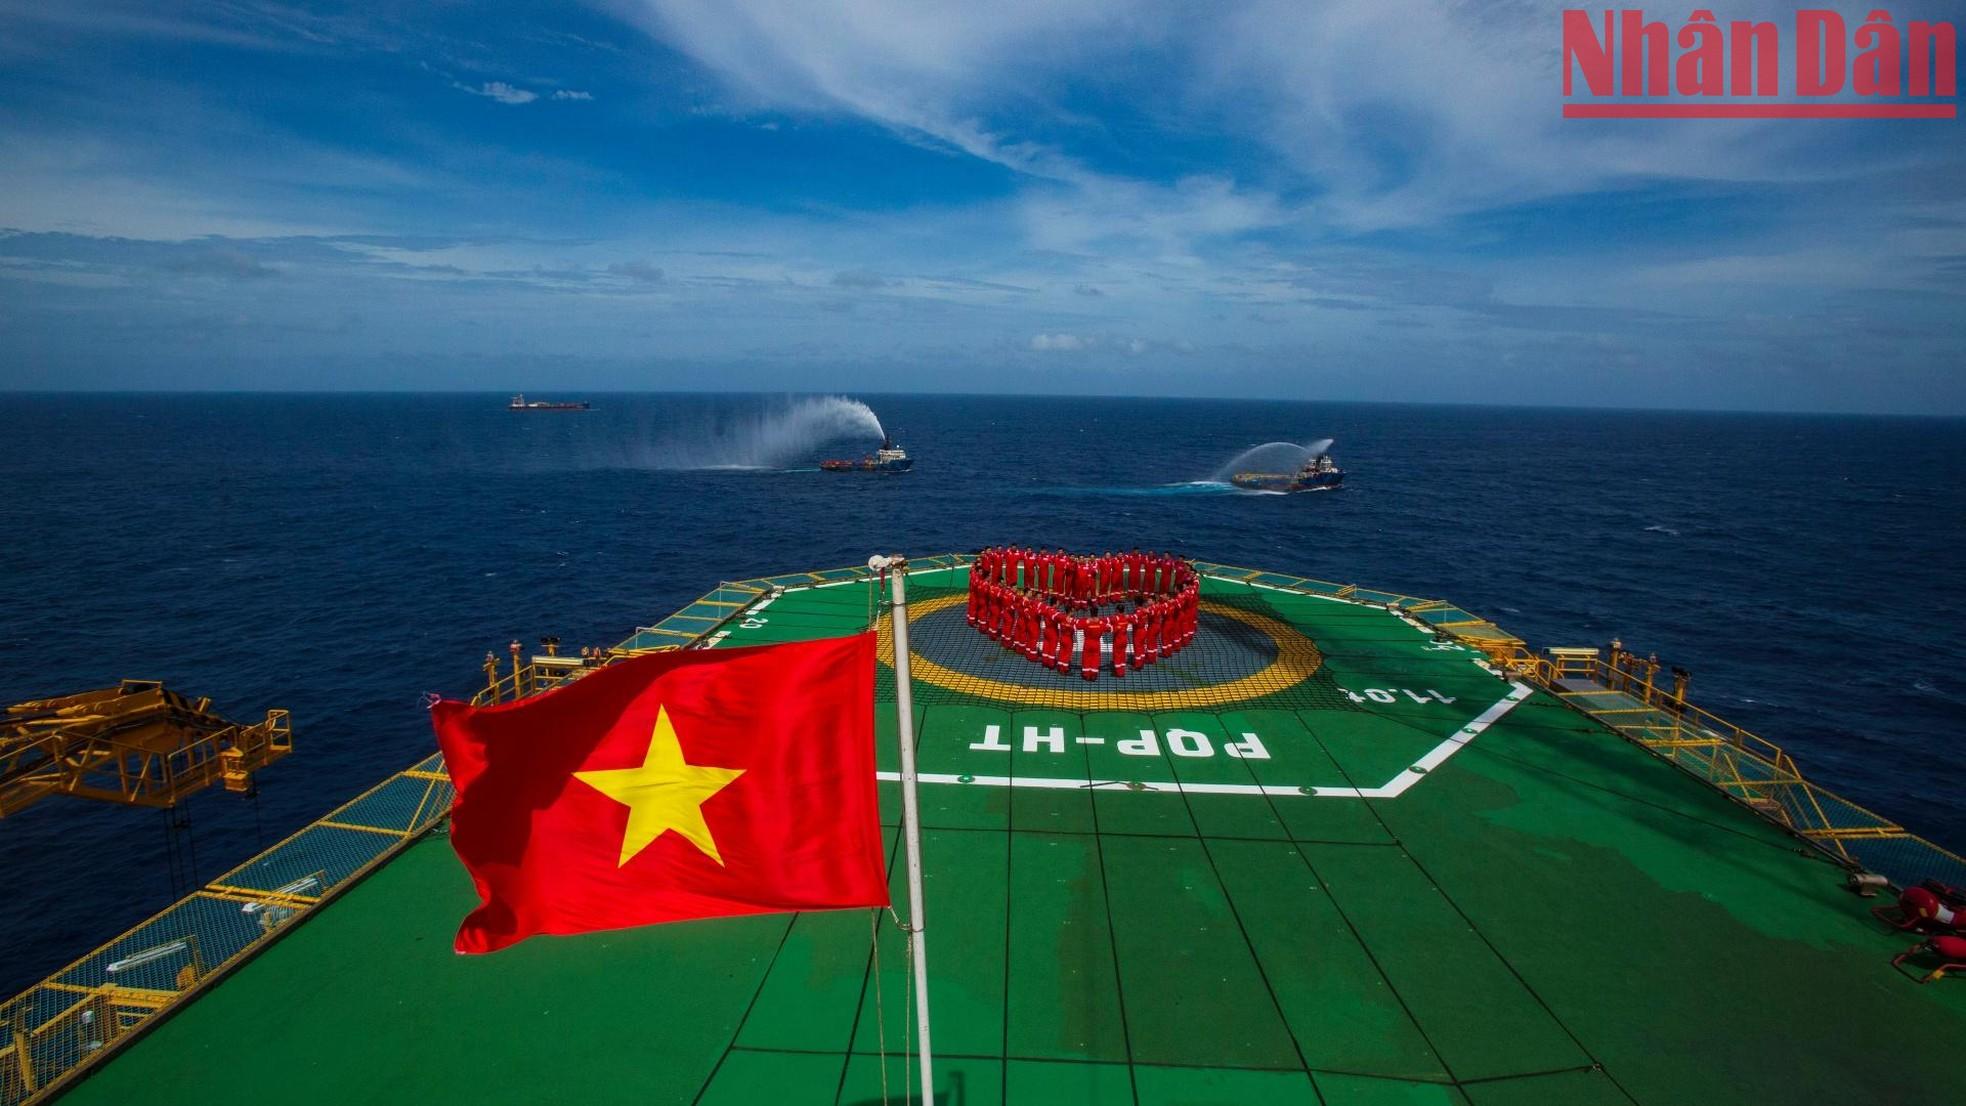 The sacred flag-raising ceremony at the farthest oil rig in the East Sea/South China Sea